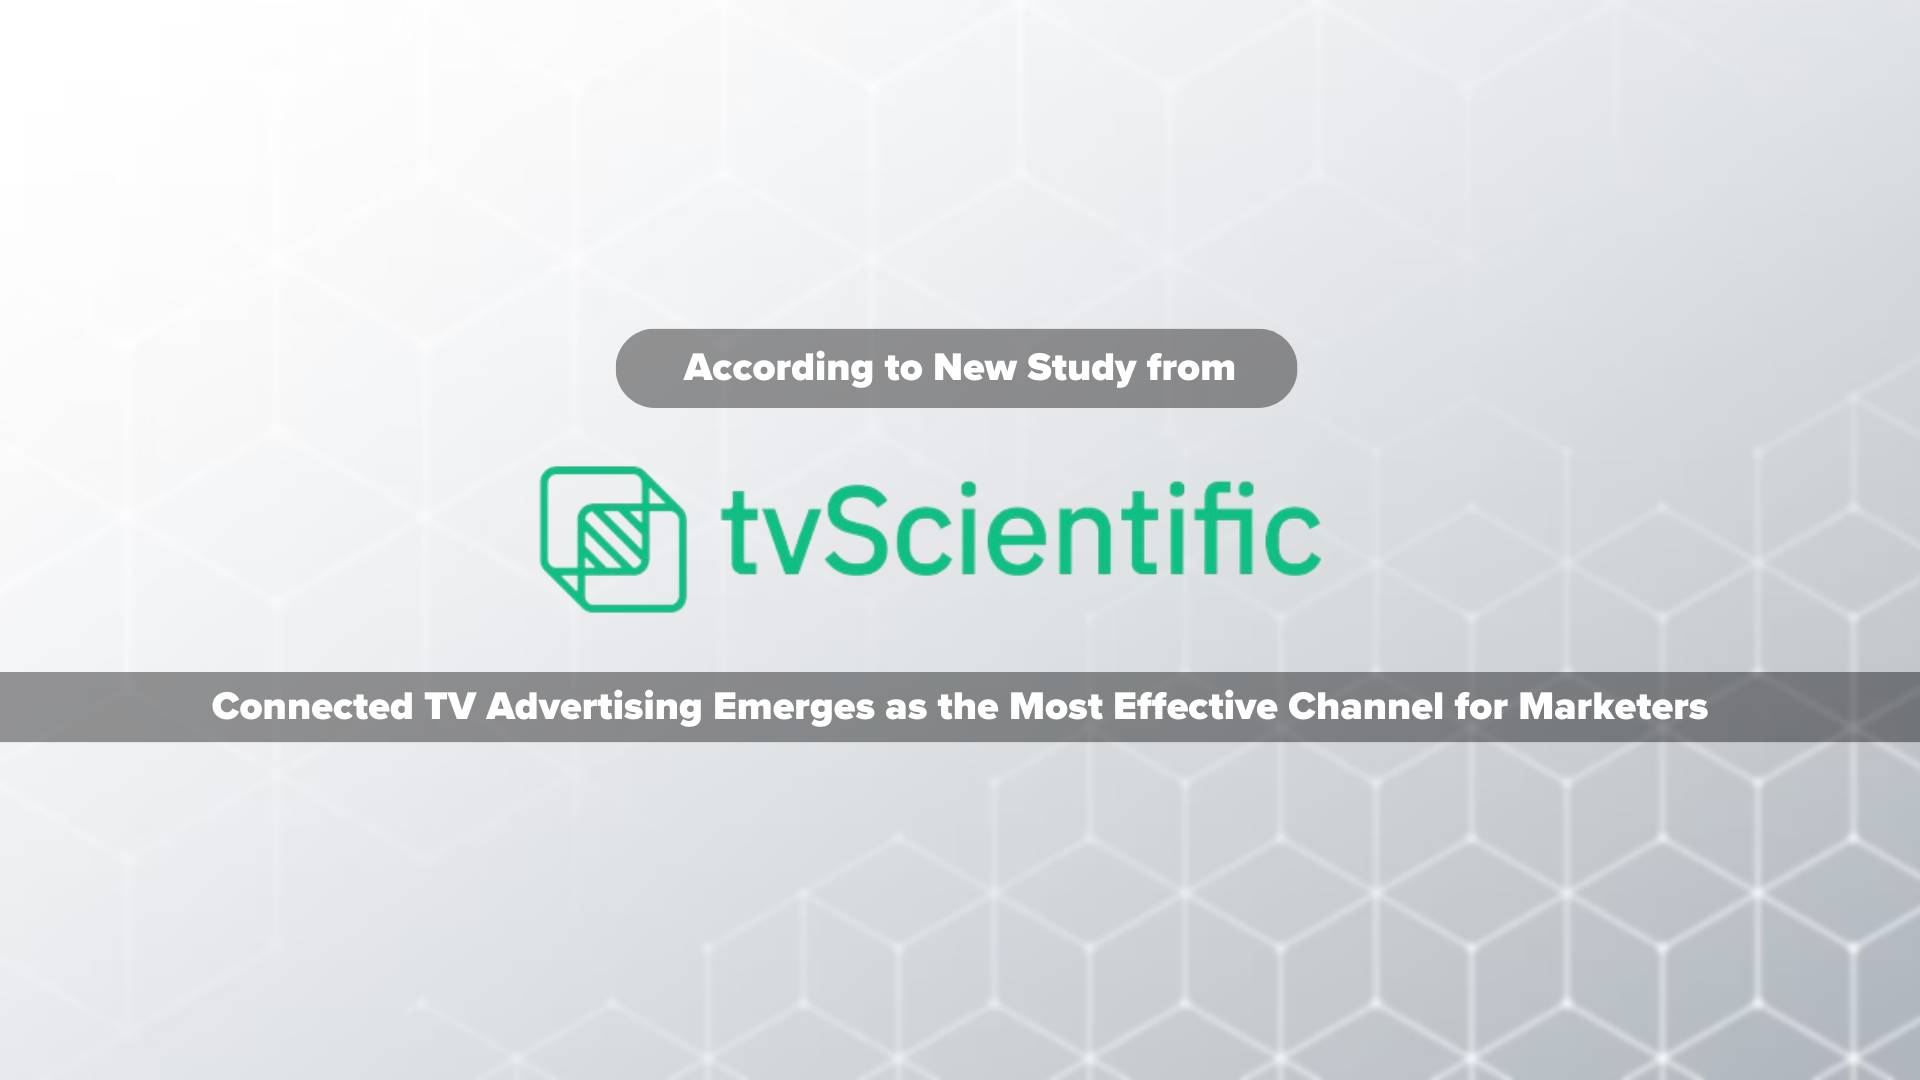 Connected TV Advertising Emerges as the Most Effective Channel for Marketers According to New Study from tvScientific